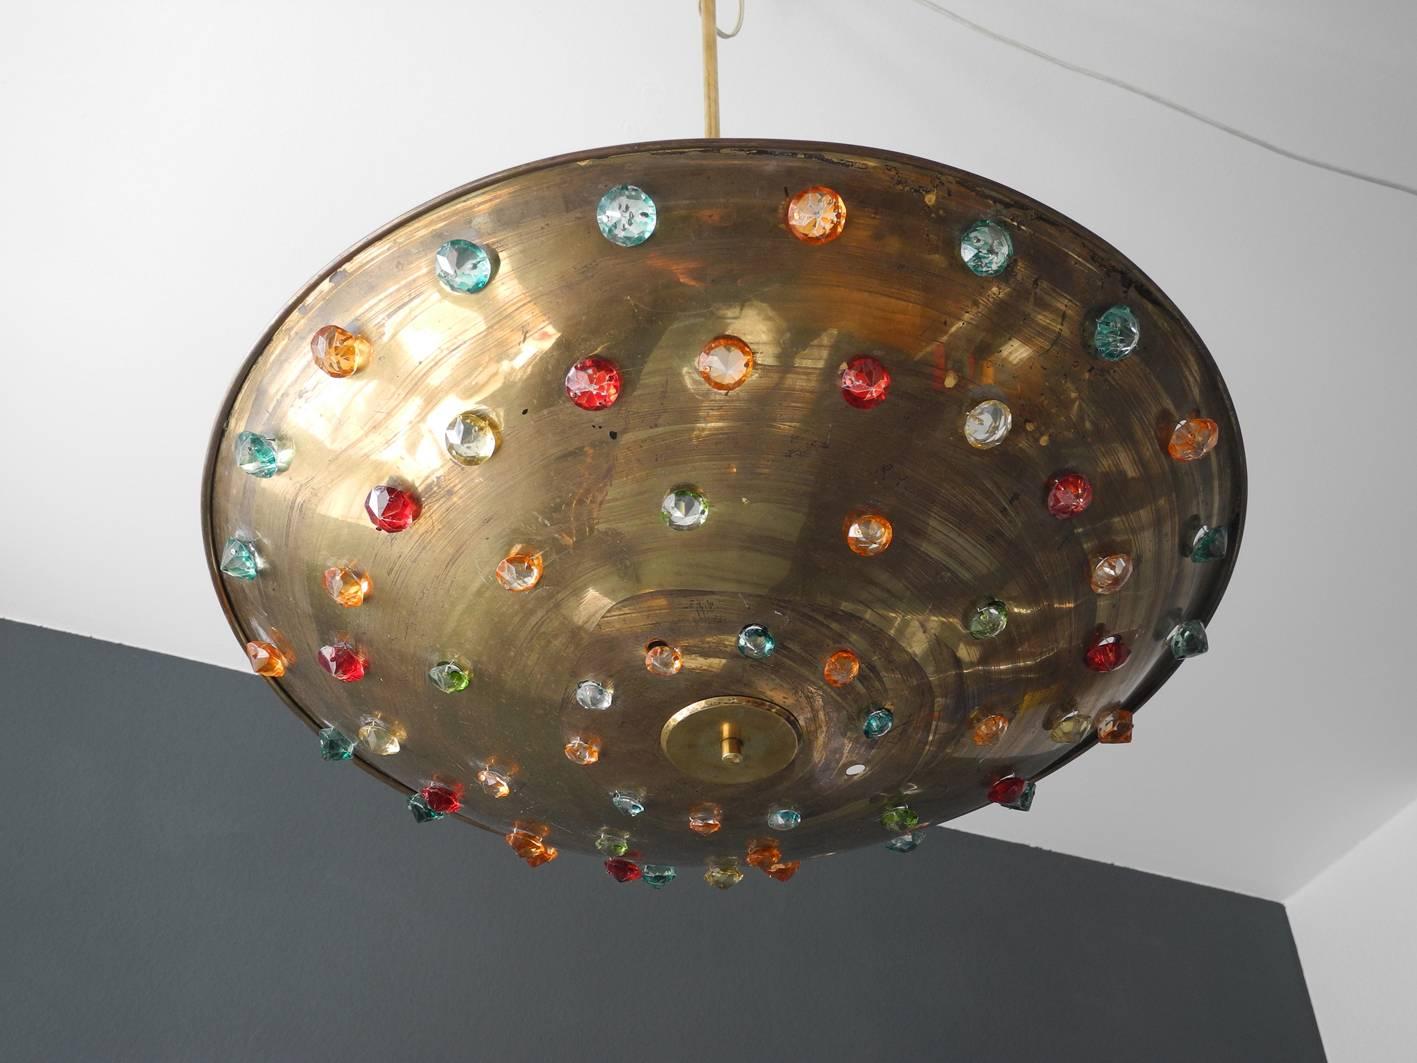 Gigantic extra large midcentury brass ceiling lamp with colorful glass stones. Very rare Minimalist round brass shield, great design for indirect ceiling lighting. With crystal cut large colored glass stones. Probably from an Italian production. A